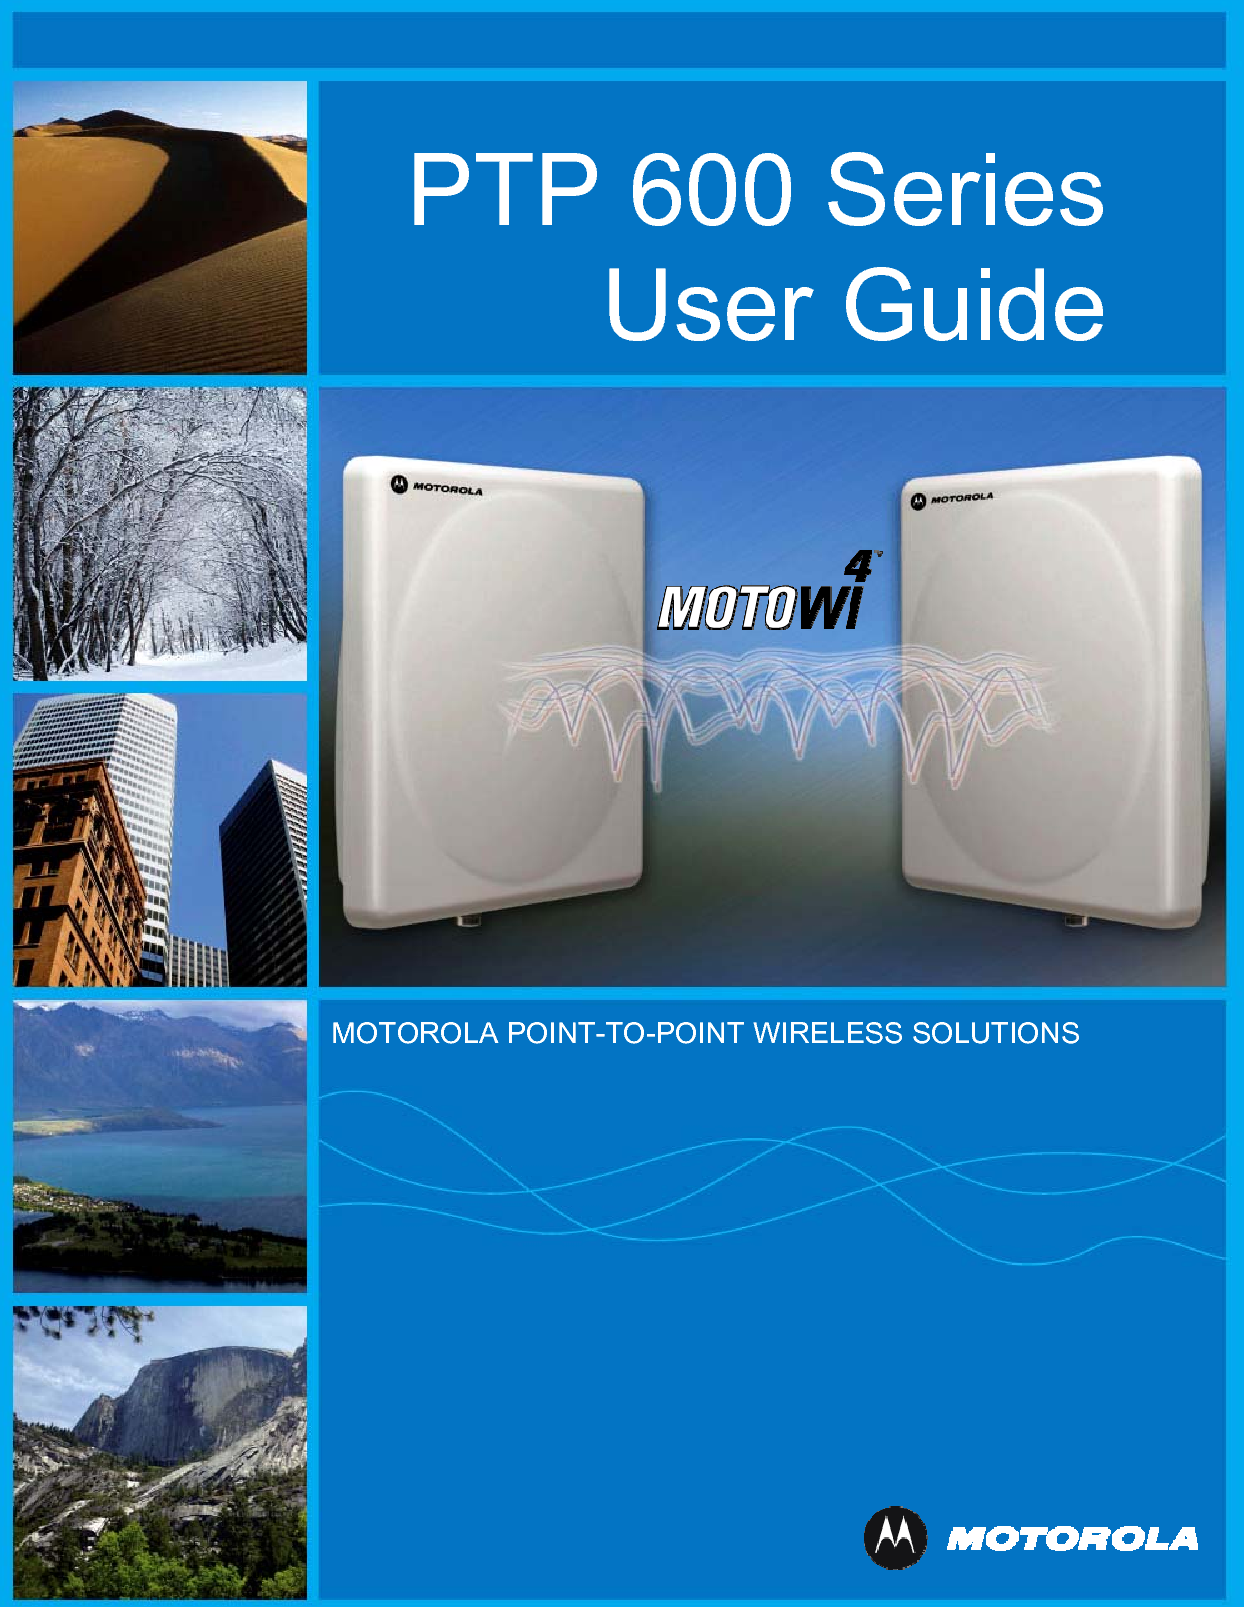 PTP 600 Series User Guide              MOTOROLA POINT-TO-POINT WIRELESS SOLUTIONS  